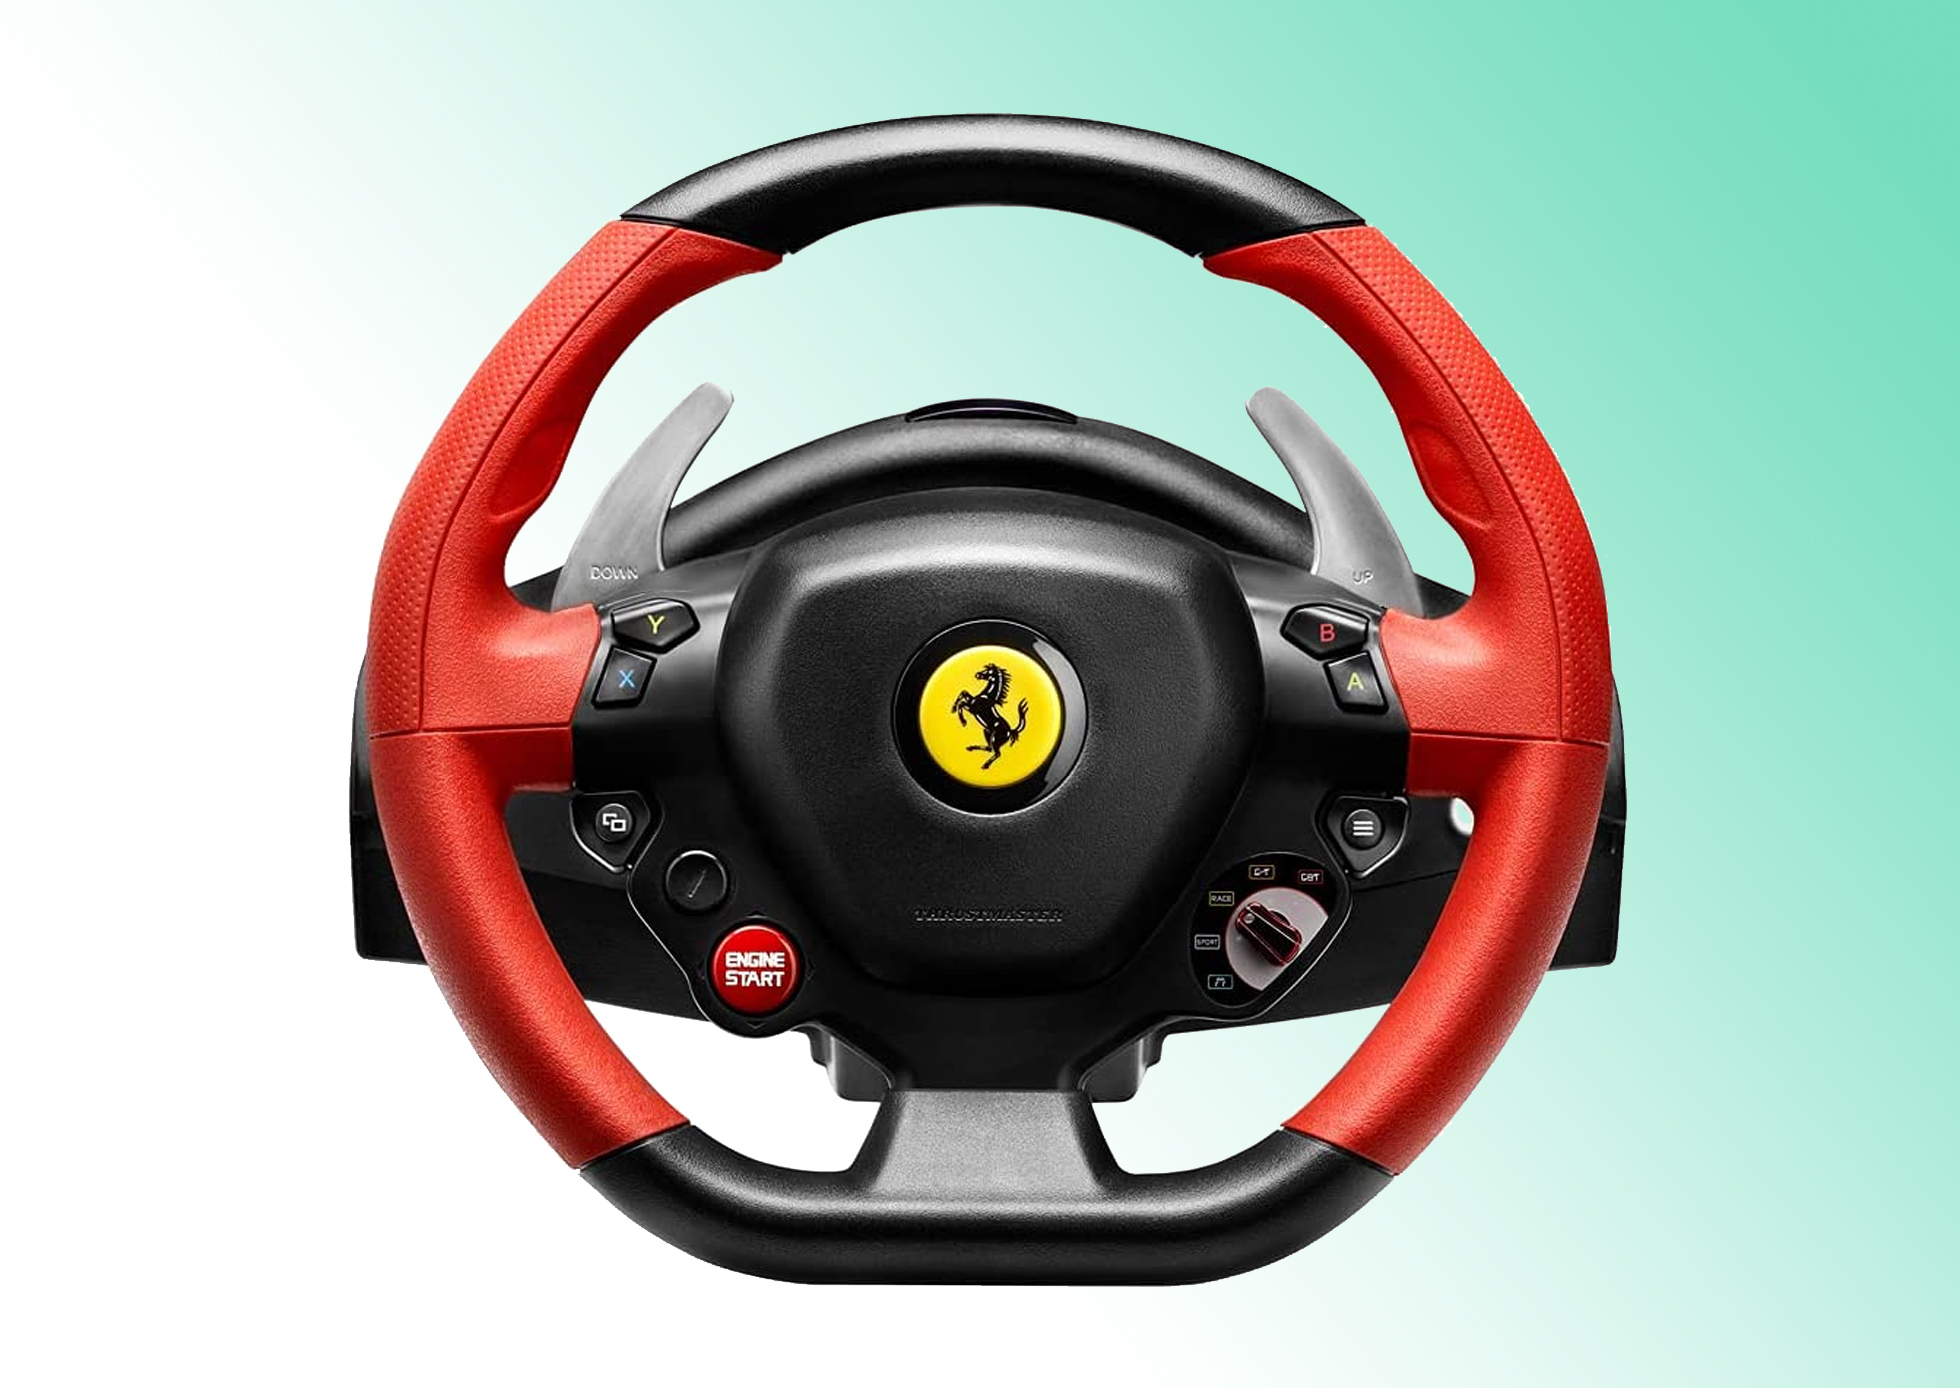 Test and Reviews of the Thrustmaster Ferrari 458 Spider steering wheel